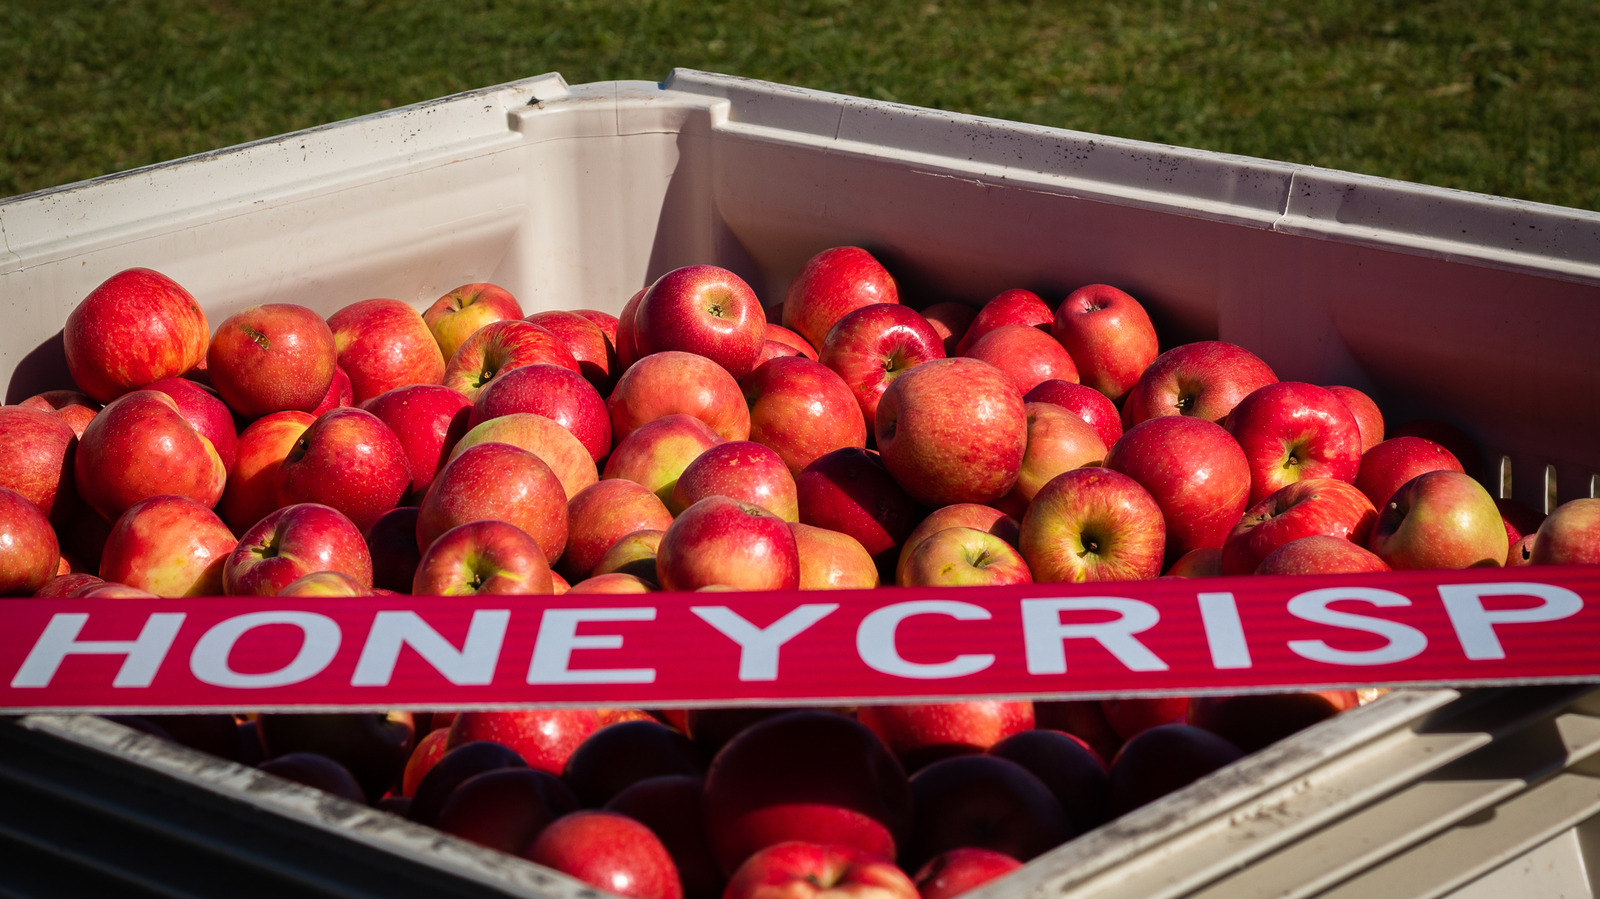 The Big Problem Costco Shoppers Have With These Honeycrisp Apples